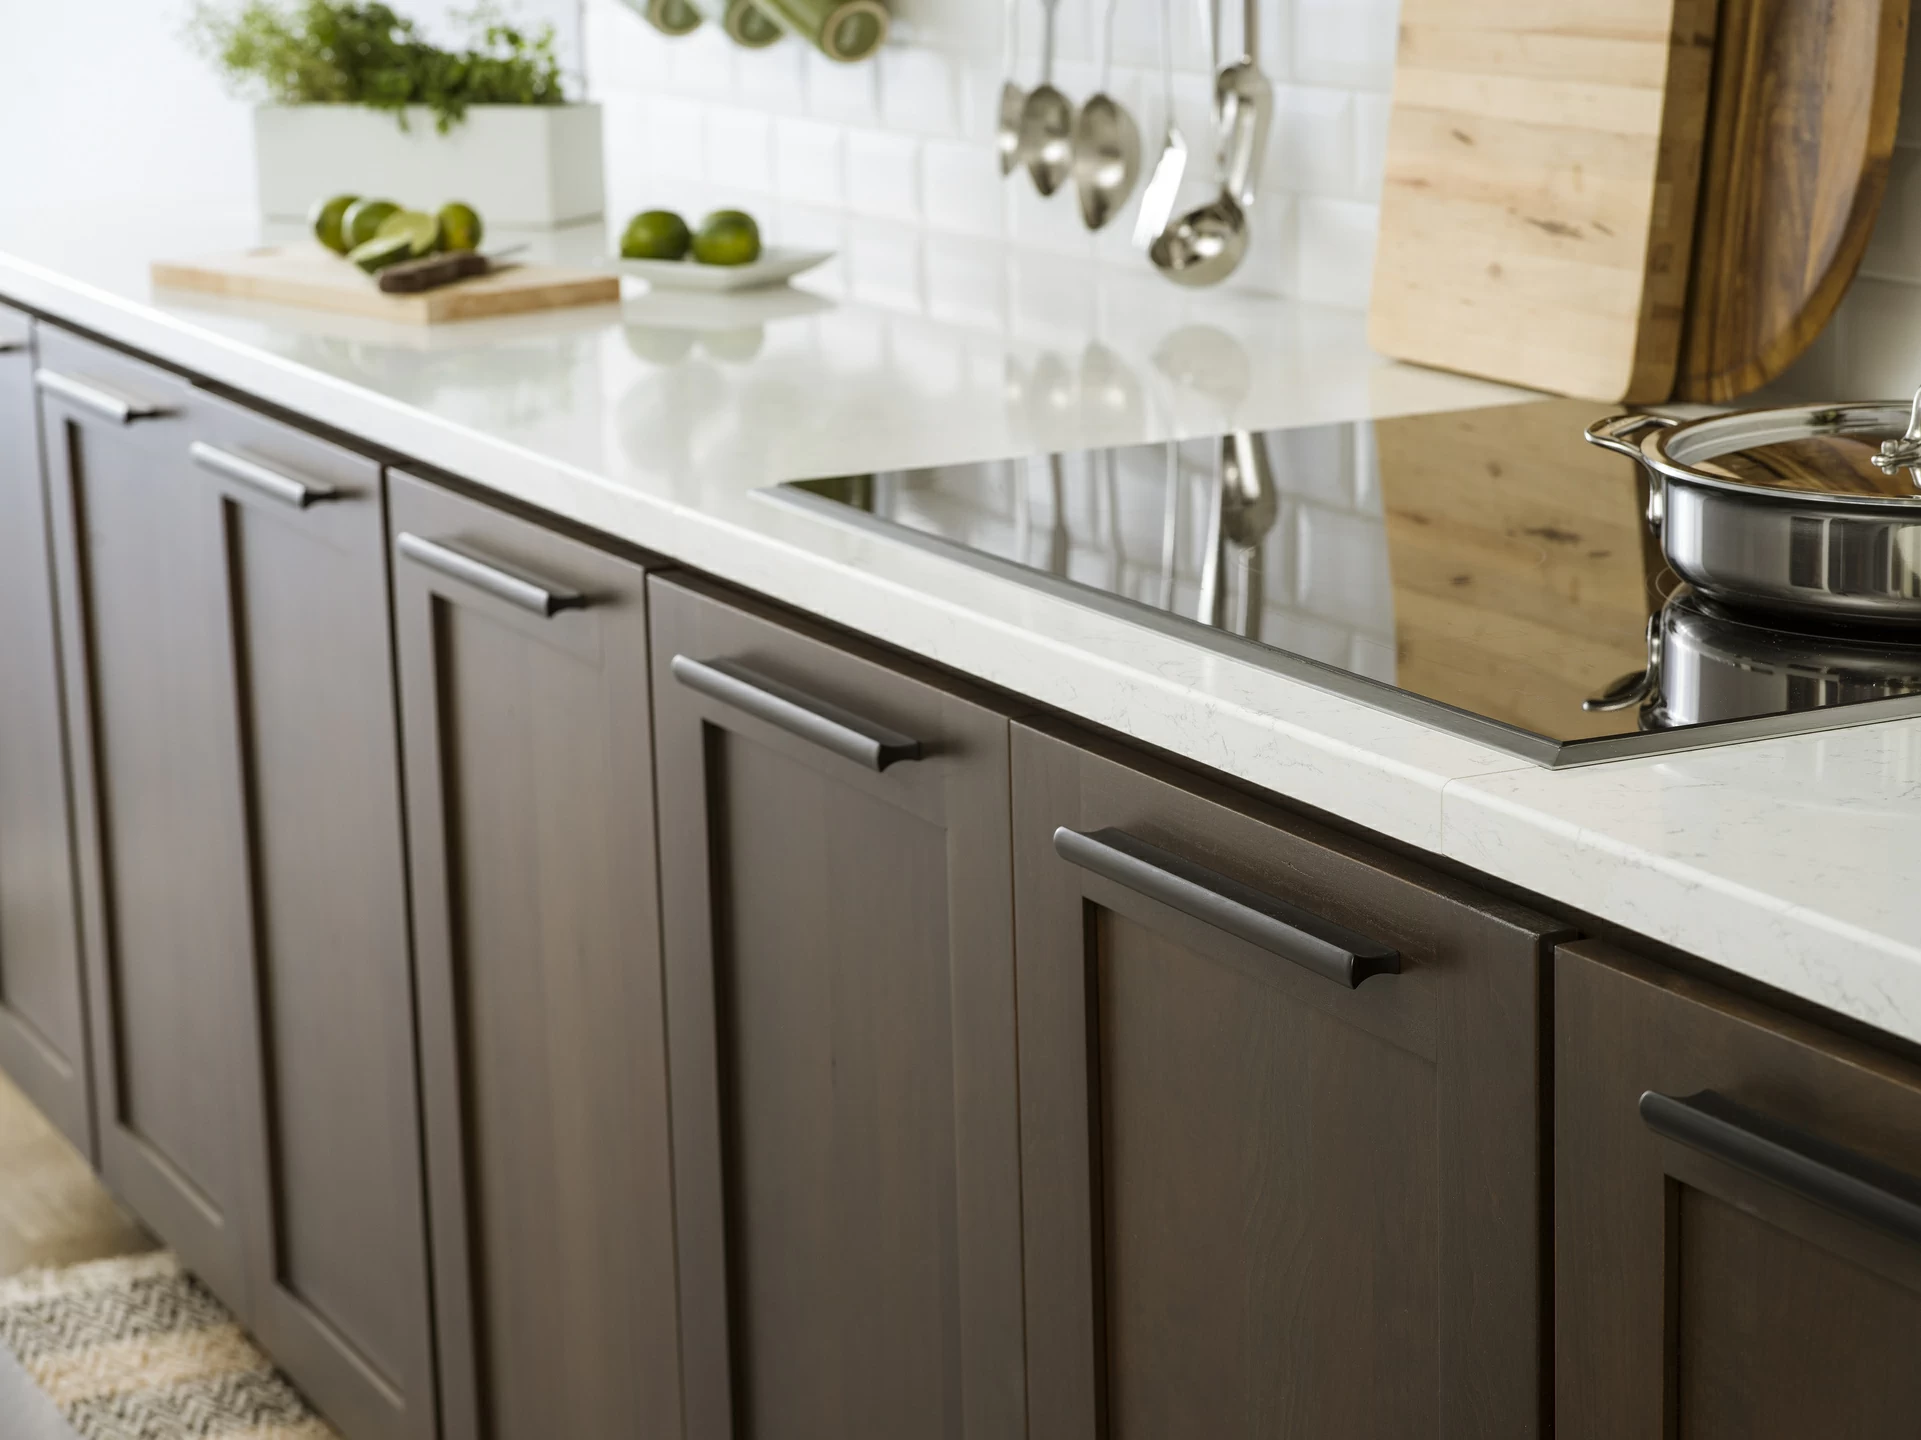 Cabinetry Hardware: What You Need to Know about Style, Finish, and  Placement of Cabinet Knobs and Pulls - Dura Supreme Cabinetry